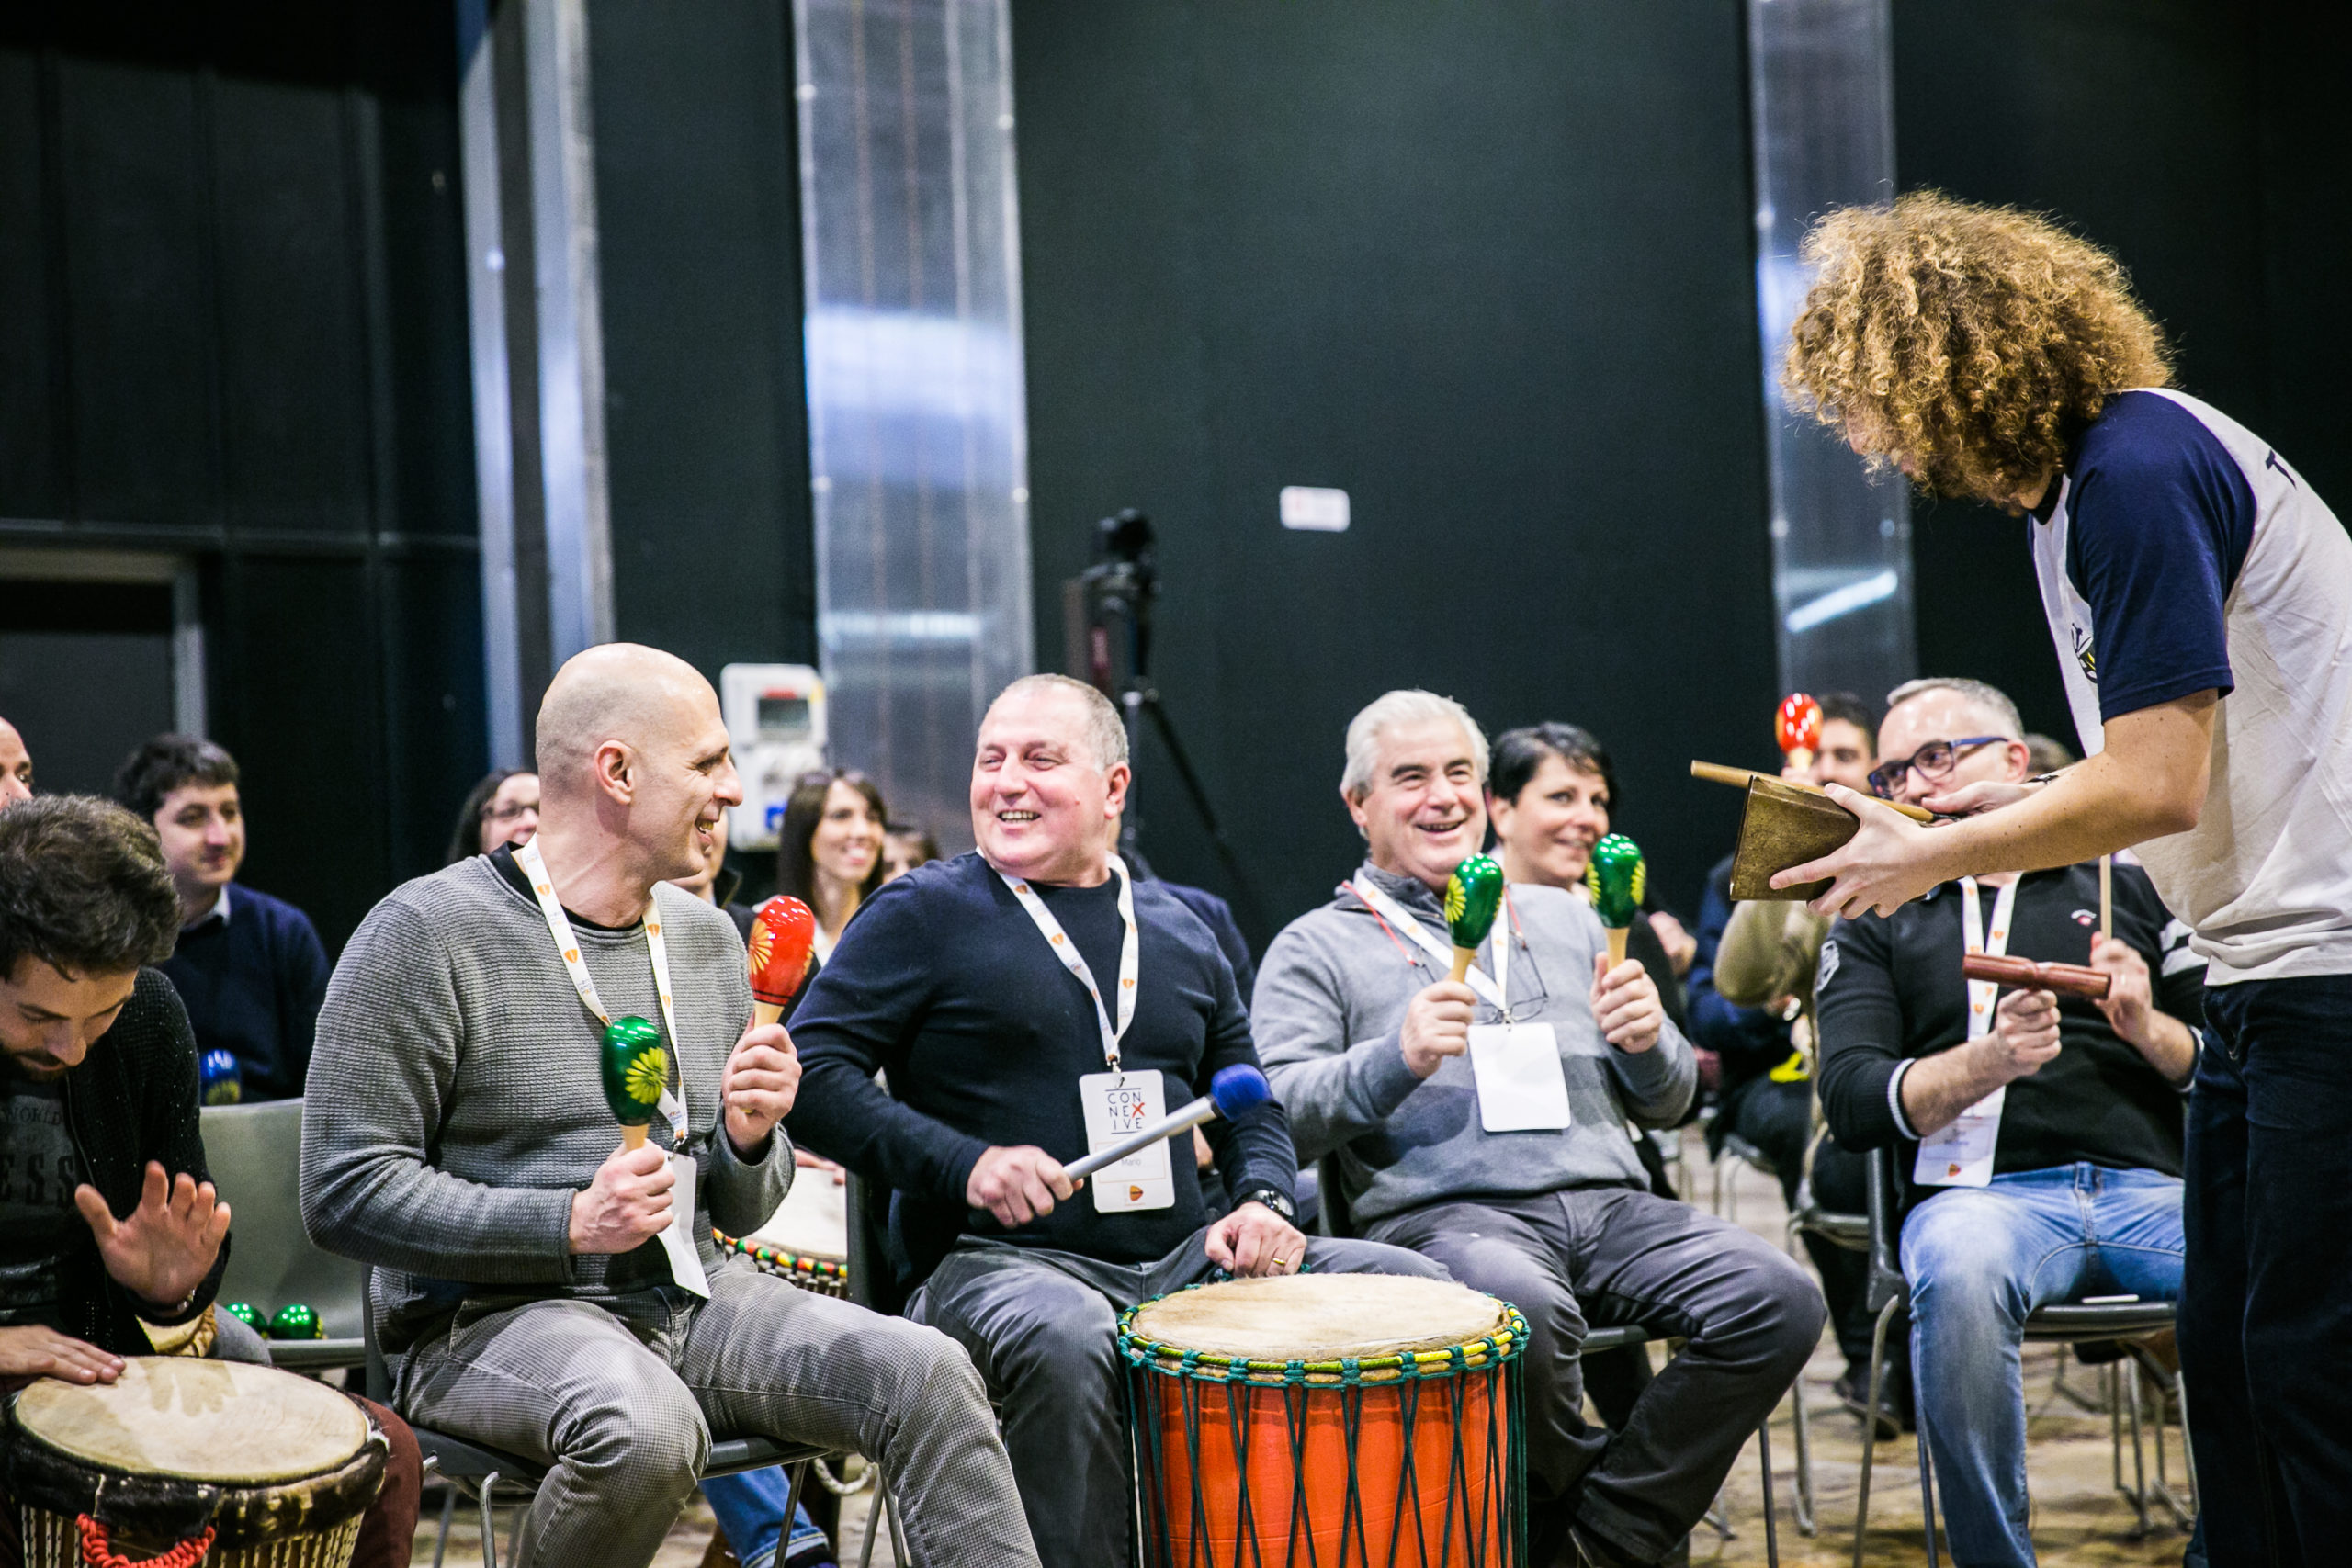 Rhythm and Science: the Benefits of the Drum Circle in a Corporate Team Building